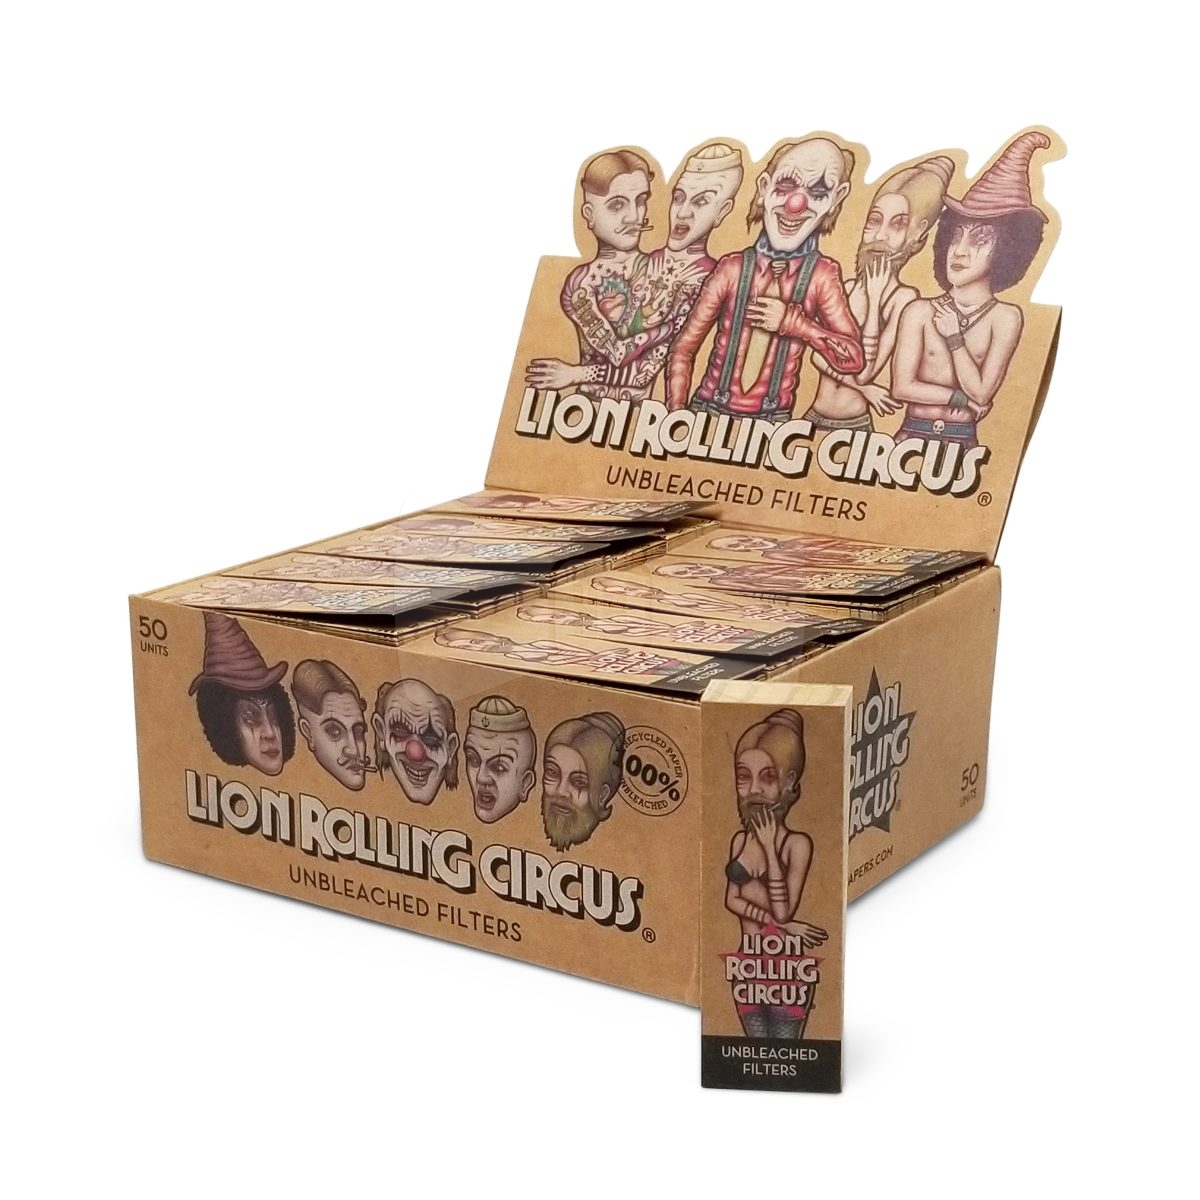 Lion Rolling Circus Unbleached Tips Full Box (50 Packs)